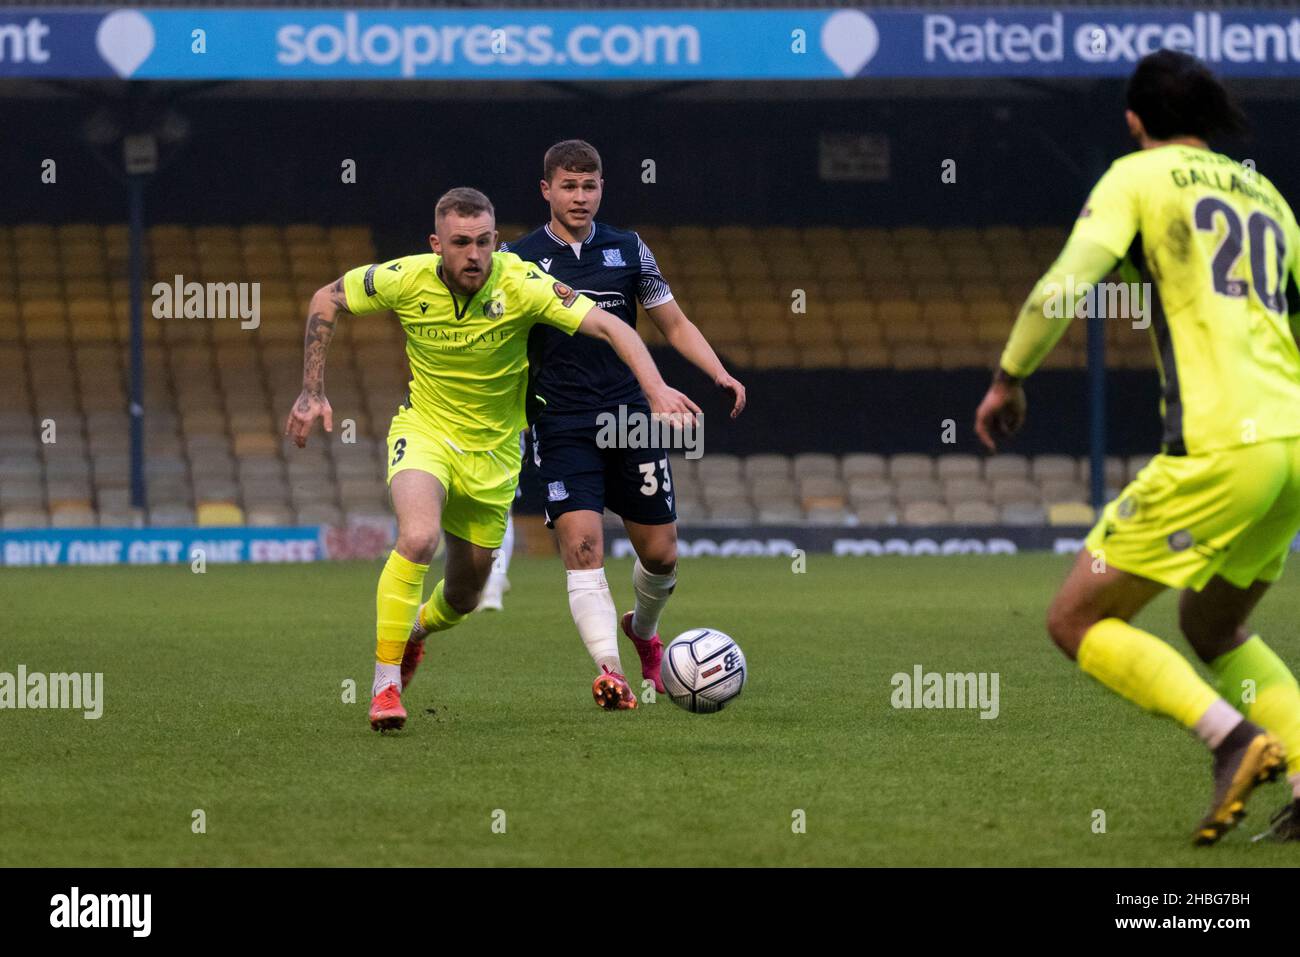 Bobby-Joe Taylor playing for Dorking in the FA Trophy 3rd round at Roots Hall, Southend United v Dorking Wanderers football match Stock Photo